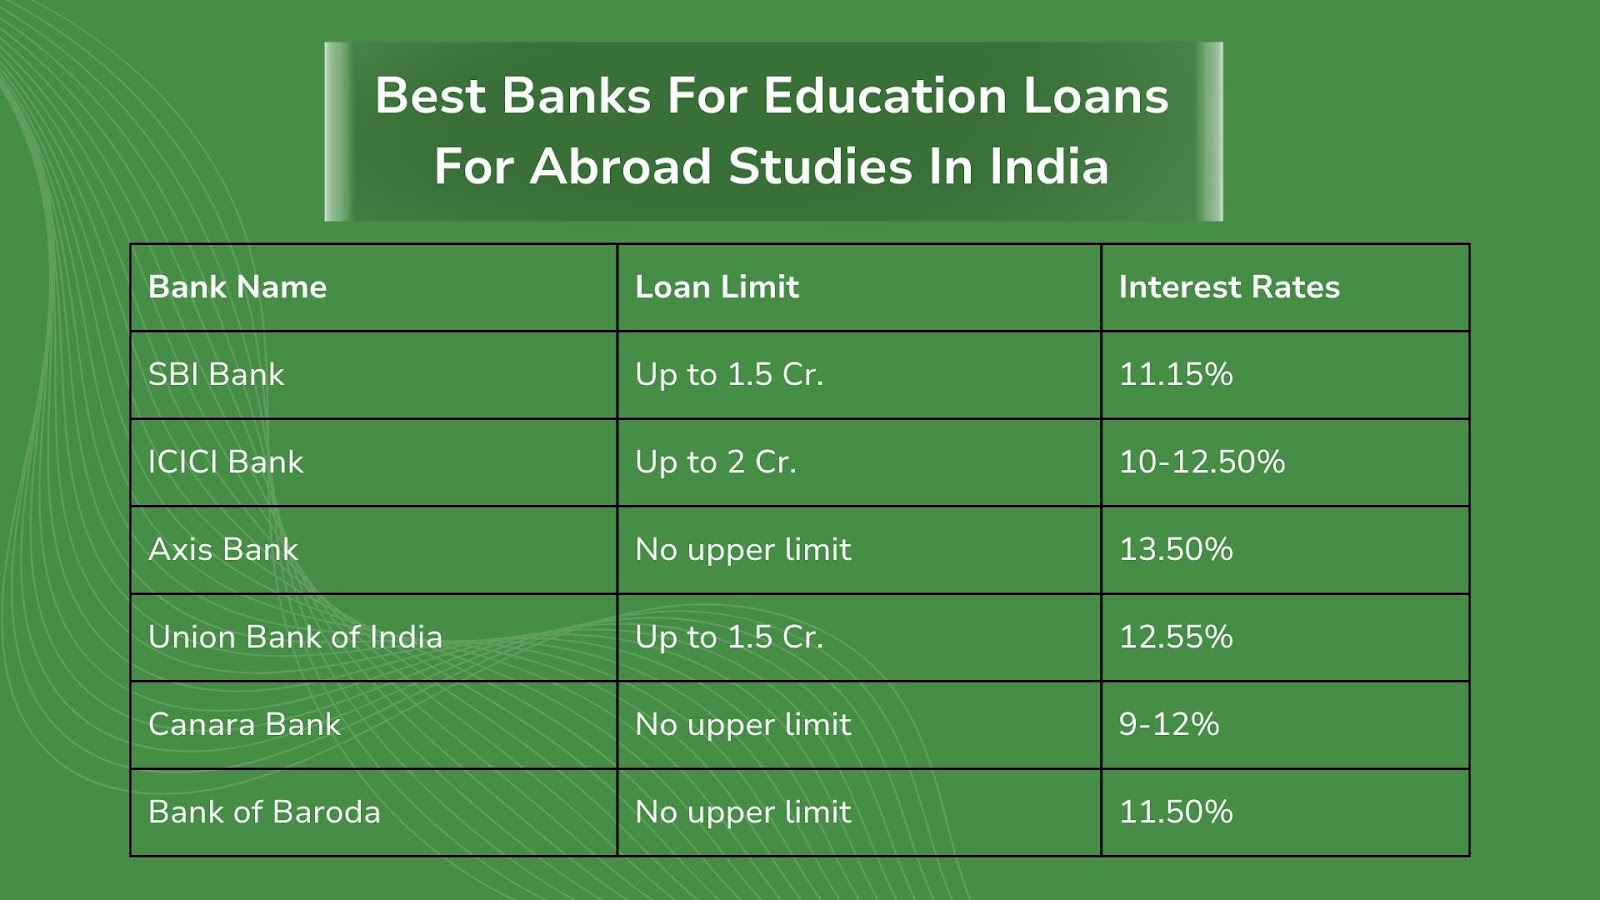 Comparison of interest rates and loan limit of best banks for education loans for abroad studies in India.